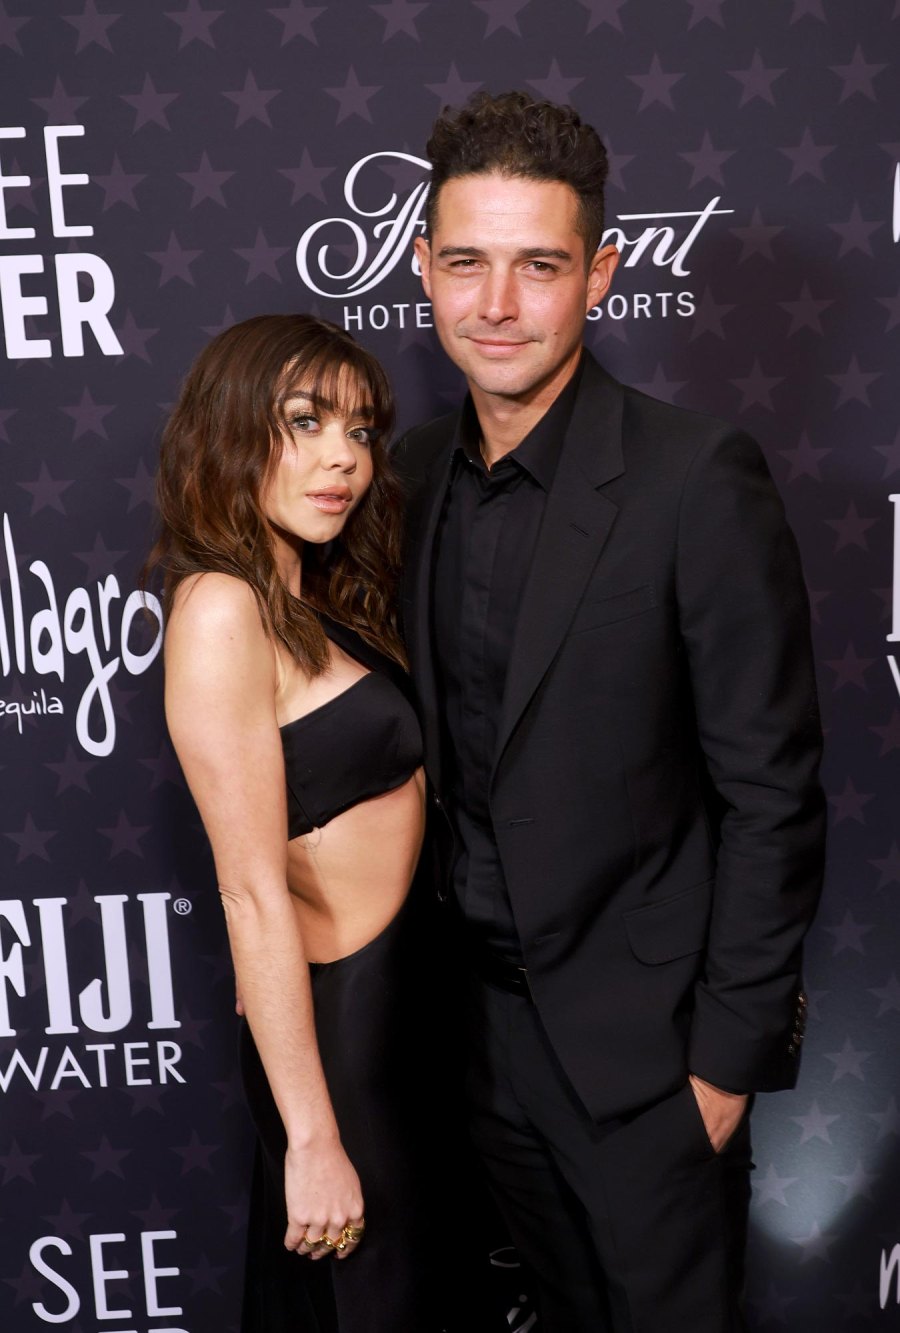 Celeb Couples Who Opened Up About Tackling Long-Distance Dating Prince Harry Meghan Markle and More GettyImages-1456651291 Sarah Hyland and Wells Adams